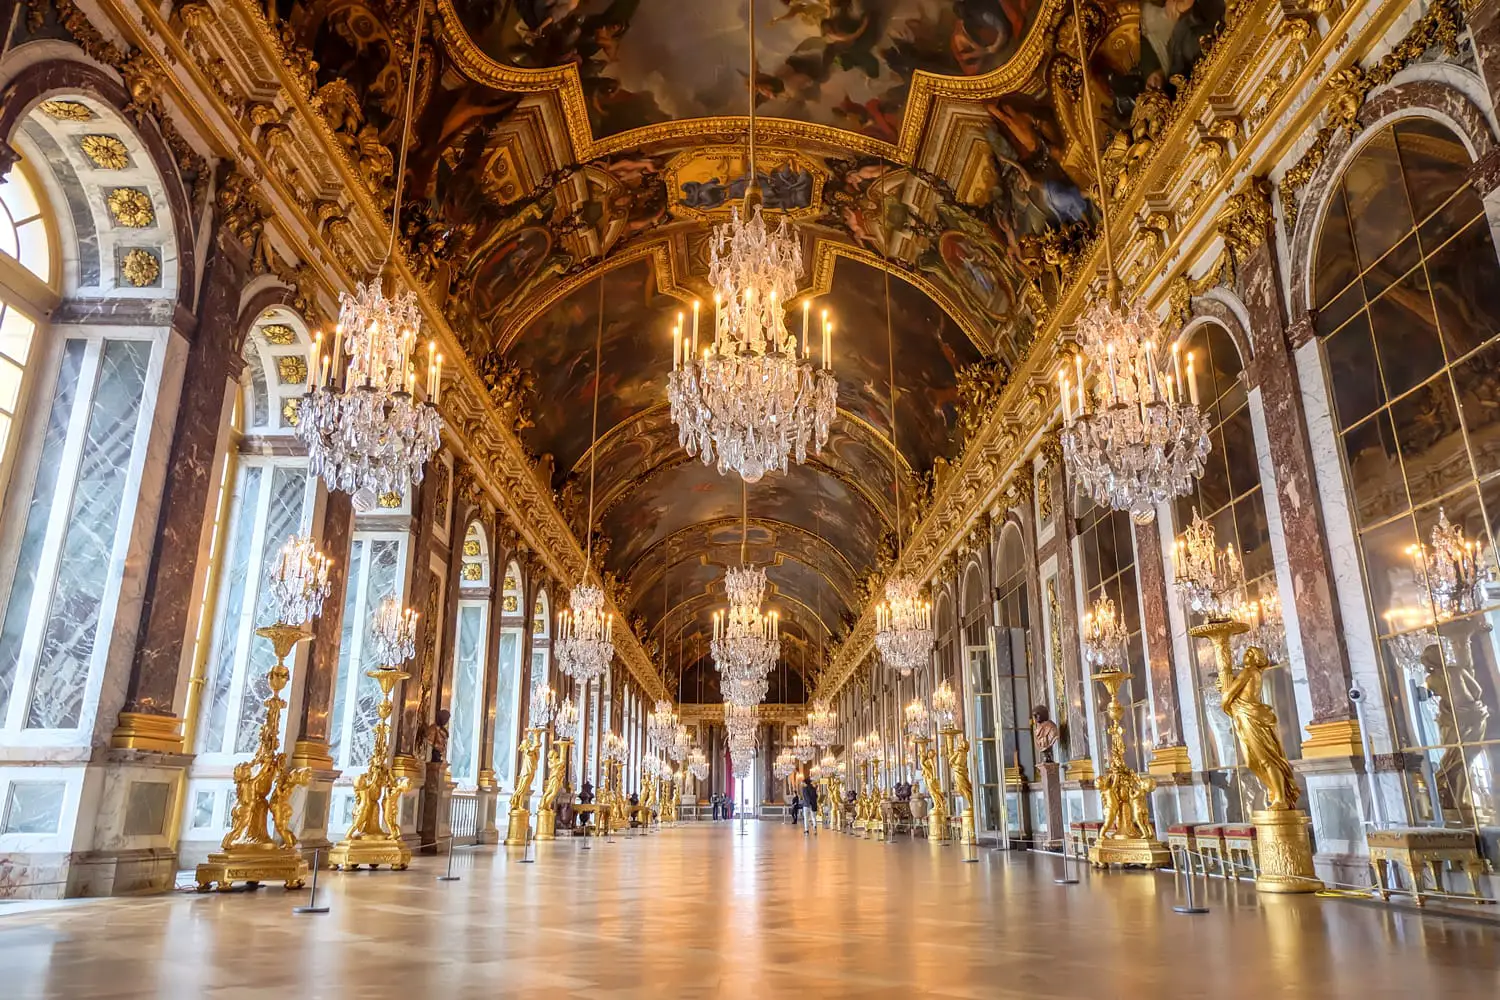 Hall of Mirrors in the palace of Versailles, France